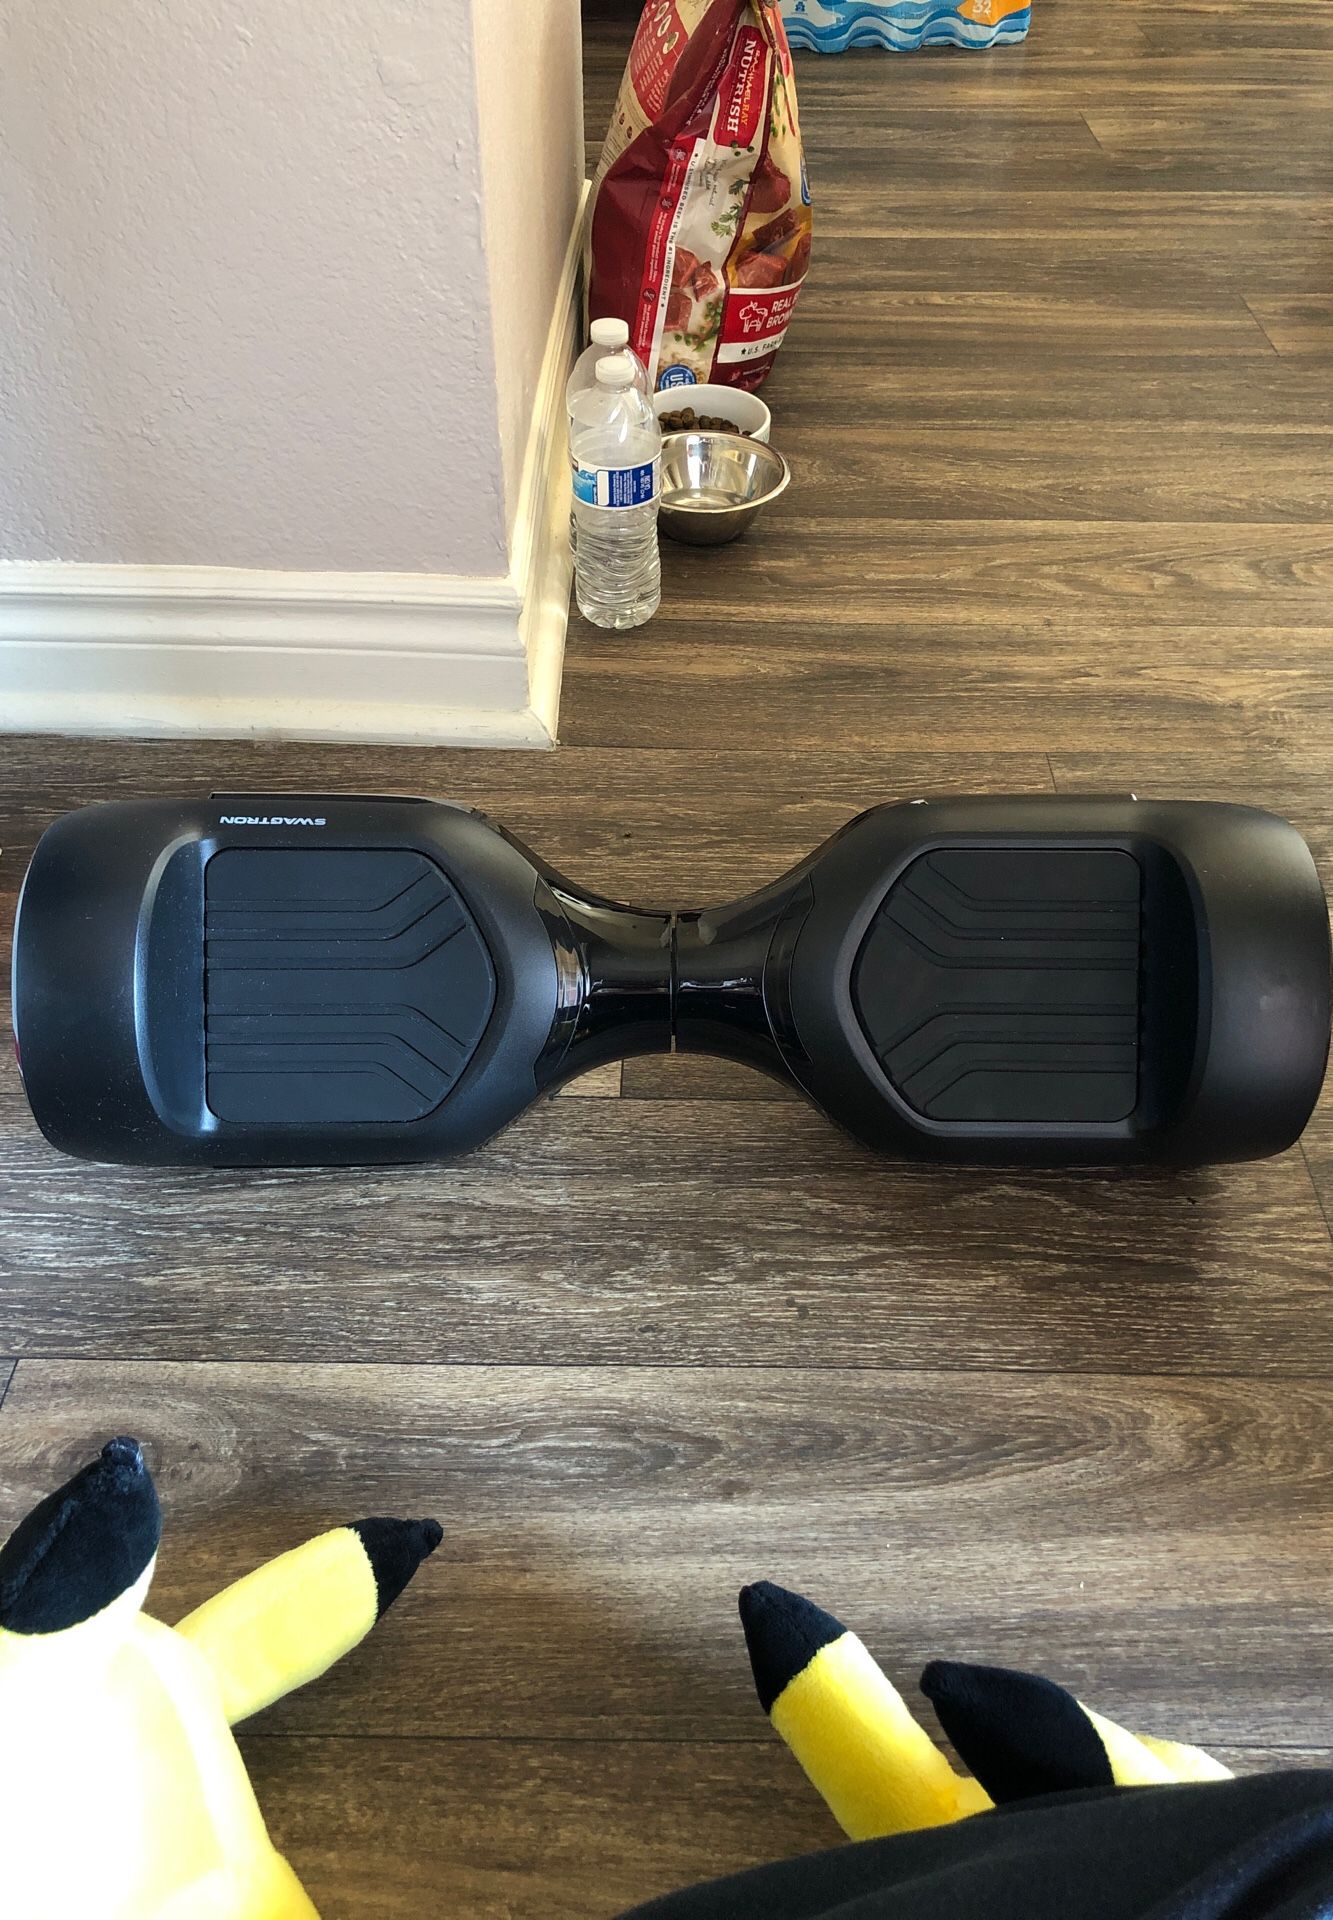 Hover board-Swagtron T580-SWAGBOARD VIBE BLUETOOTH HOVERBOARD, T580